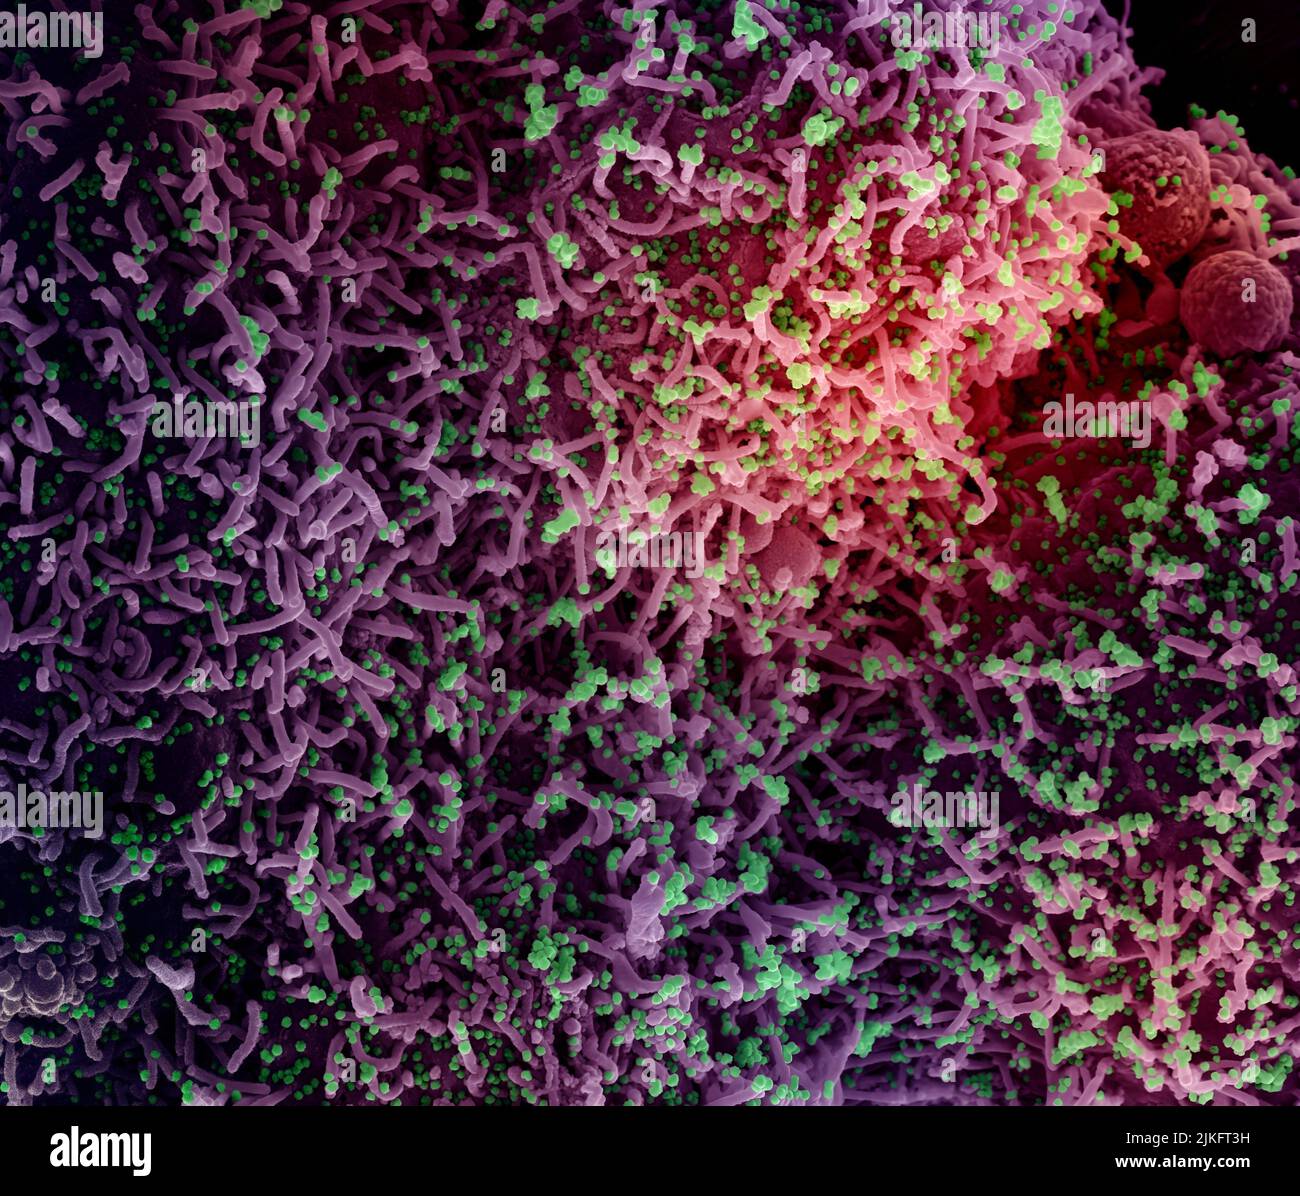 Colorized scanning electron micrograph of a cell infected with a variant strain of SARS-CoV-2 virus particles, isolated from a patient sample. Image requested from the NIAID Integrated Research Facility (IRF) in Fort Detrick, Maryland. Credit: NIAID Stock Photo